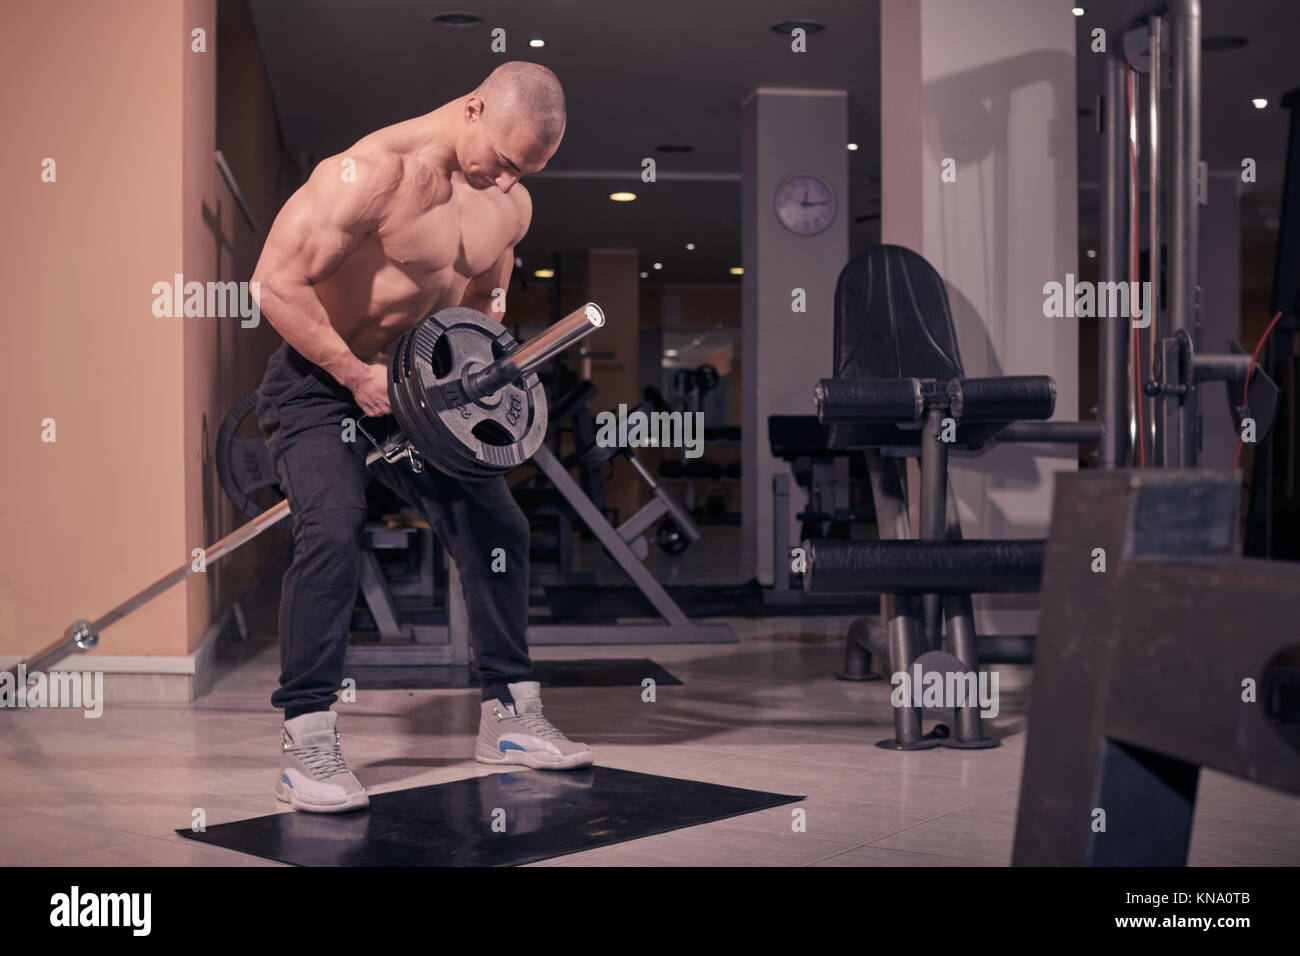 one bodybuilder, T-bar row, gym indroors exercise, muscular strong. Stock Photo